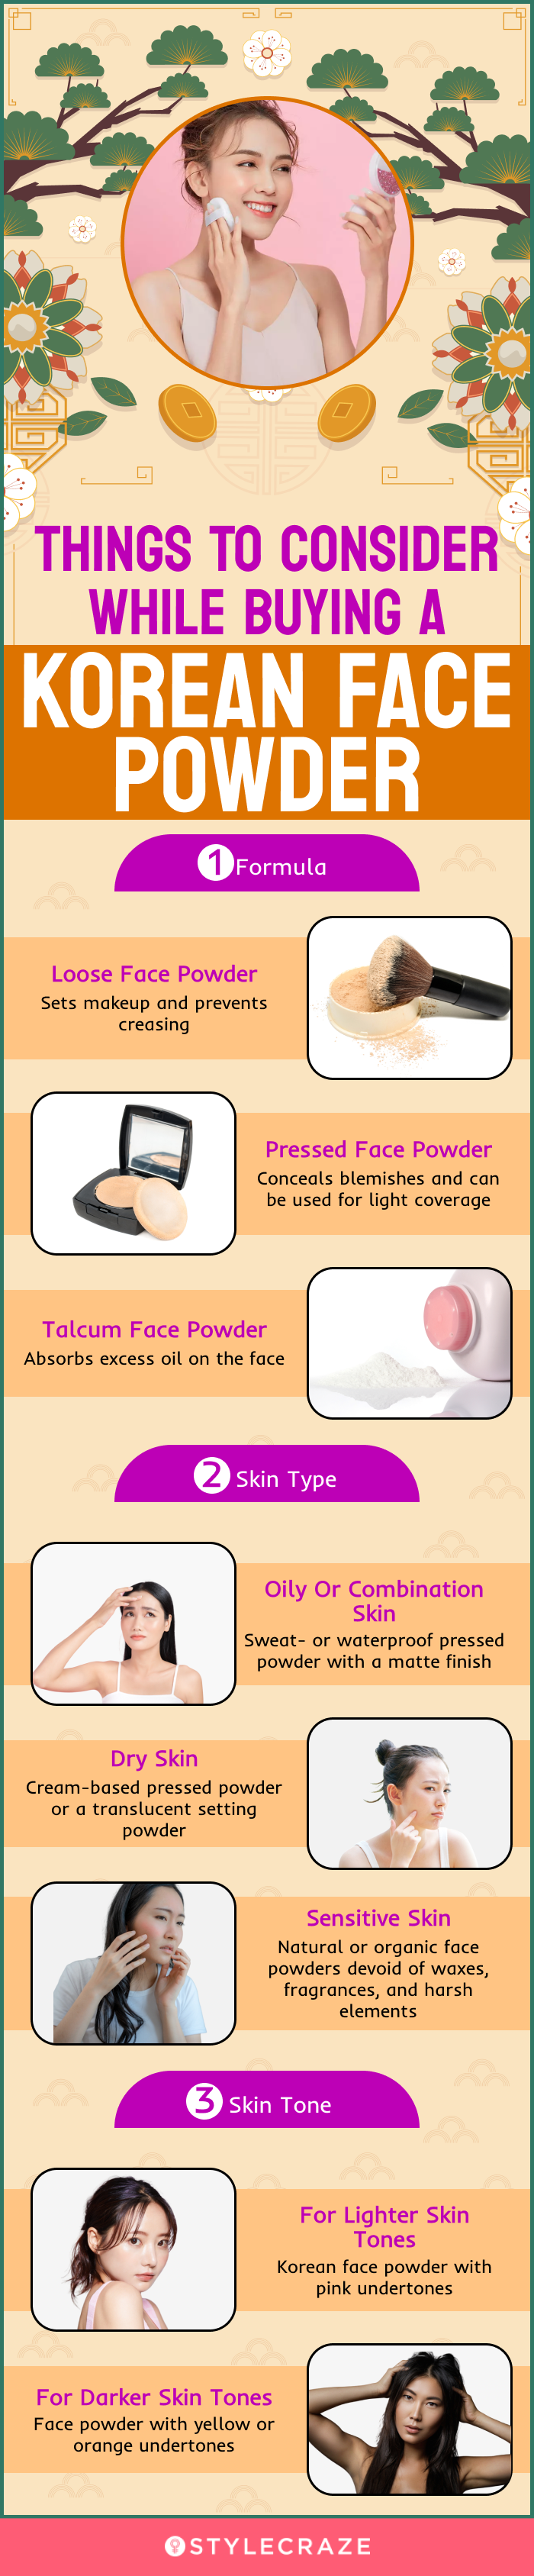 Things To Consider While Buying A Korean Face Powder [infographic]